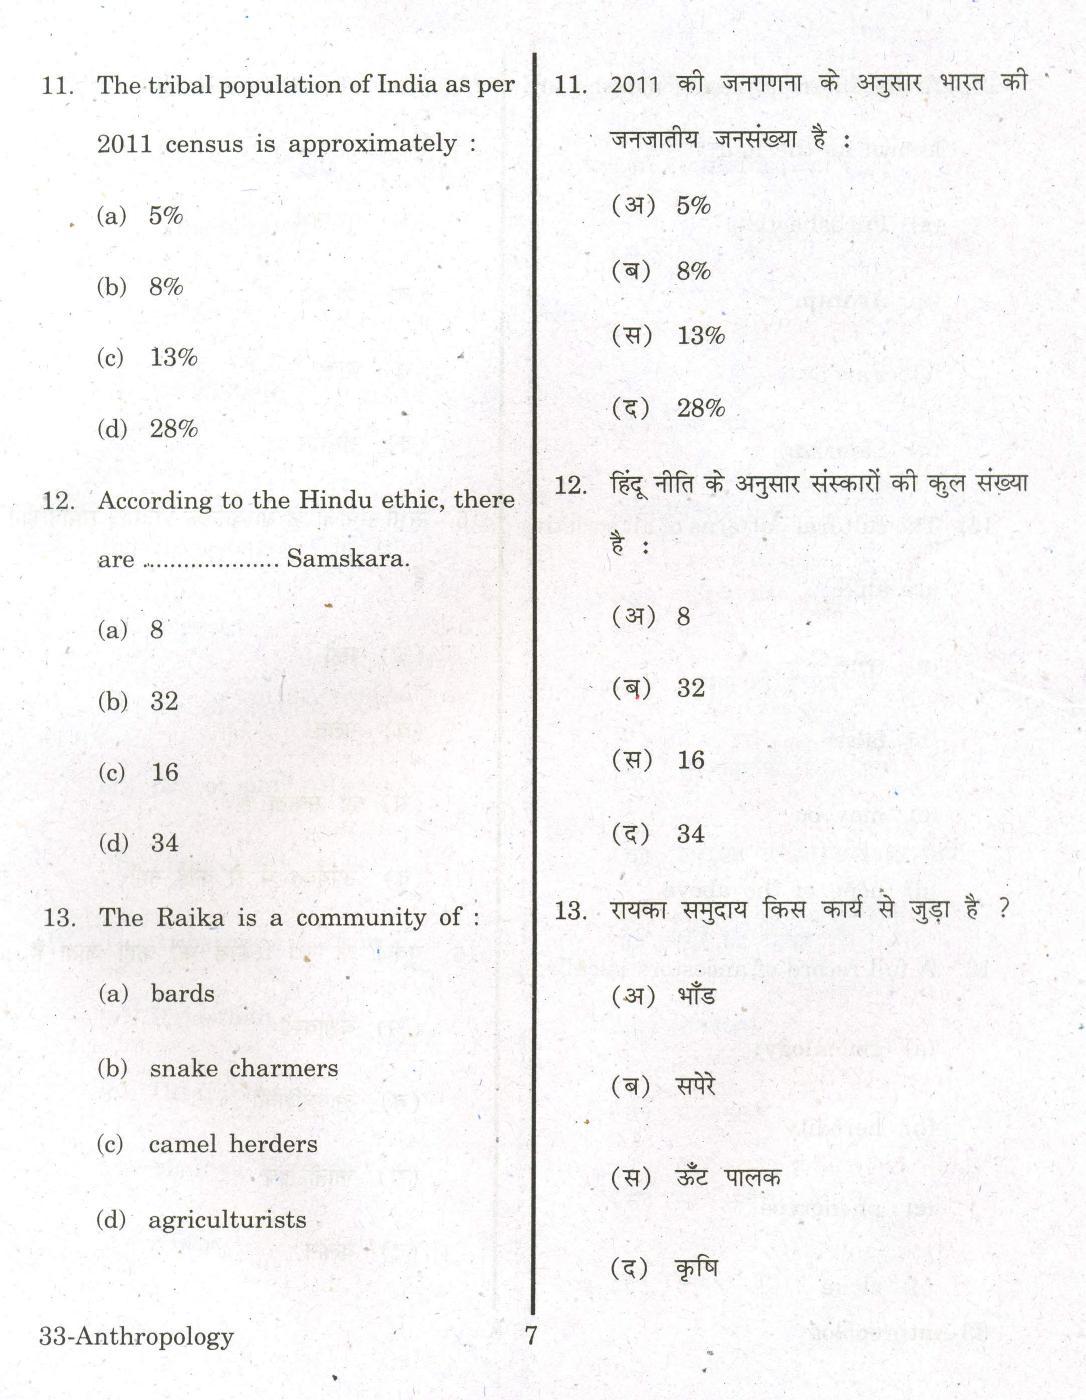 URATPG Anthropology 2013 Question Paper - Page 7